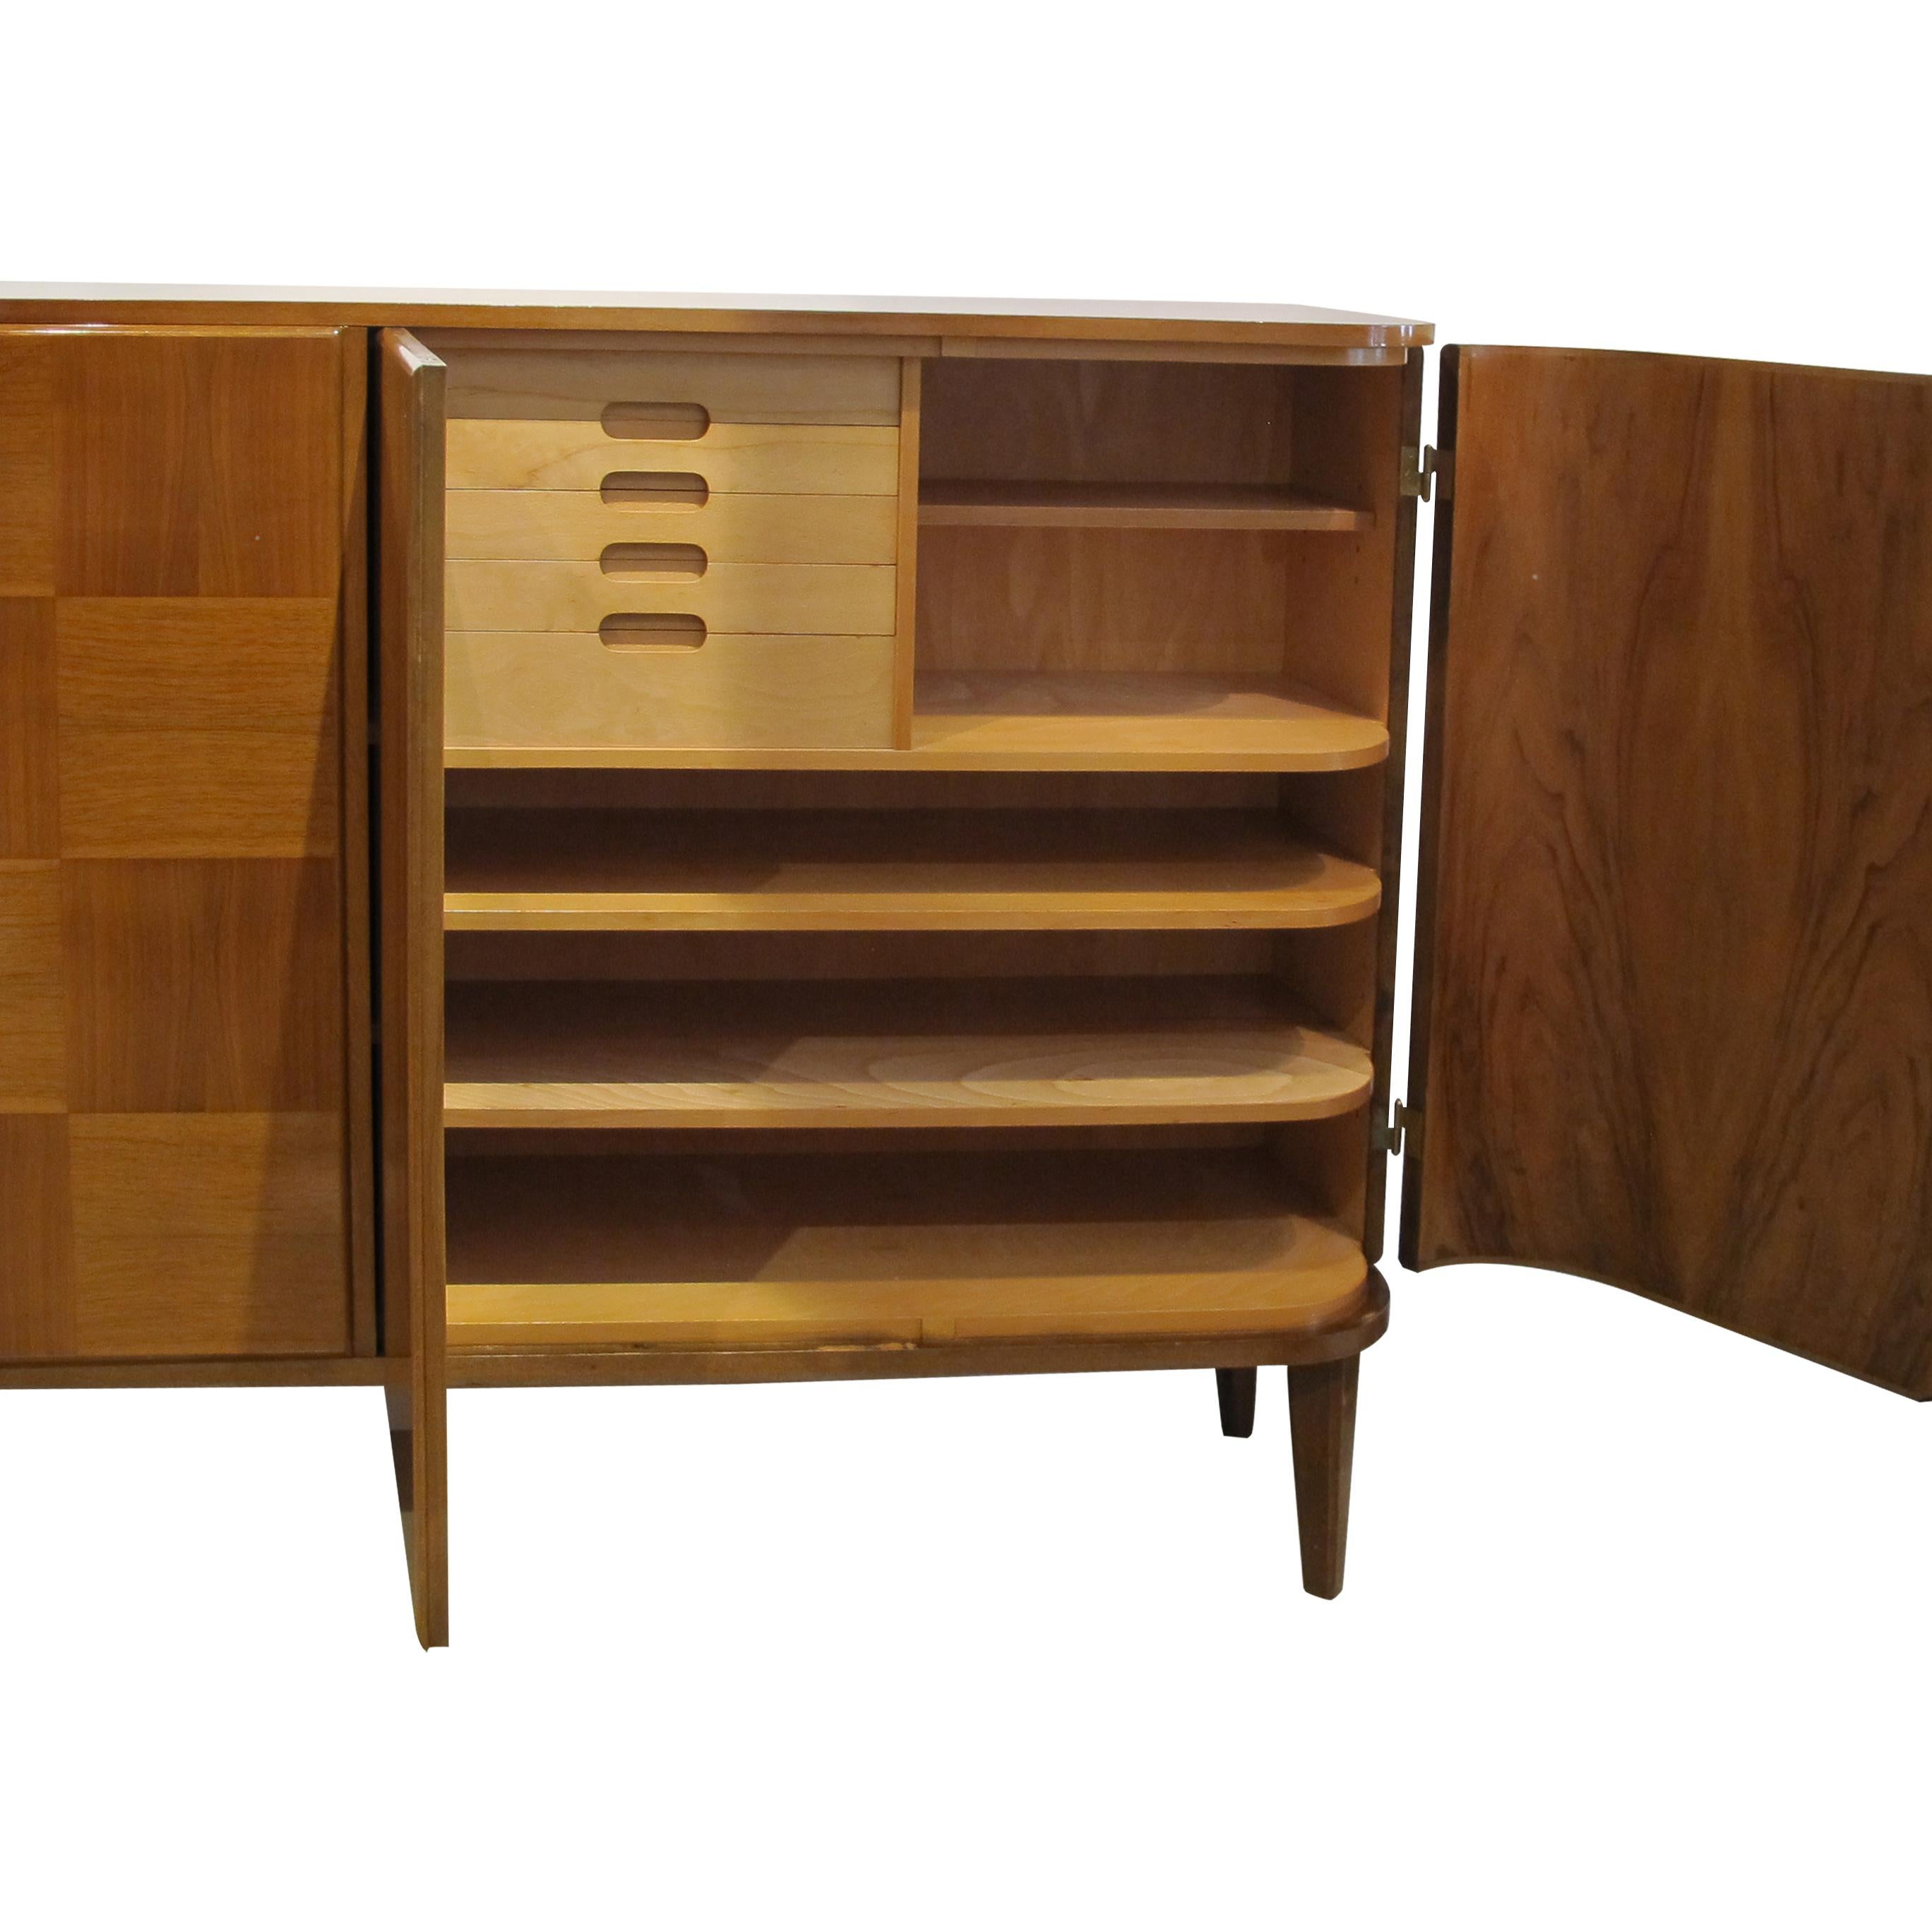 Swedish 1930s/40s Art Deco Rare Sideboard with Curved edges by Carl Axel Acking 